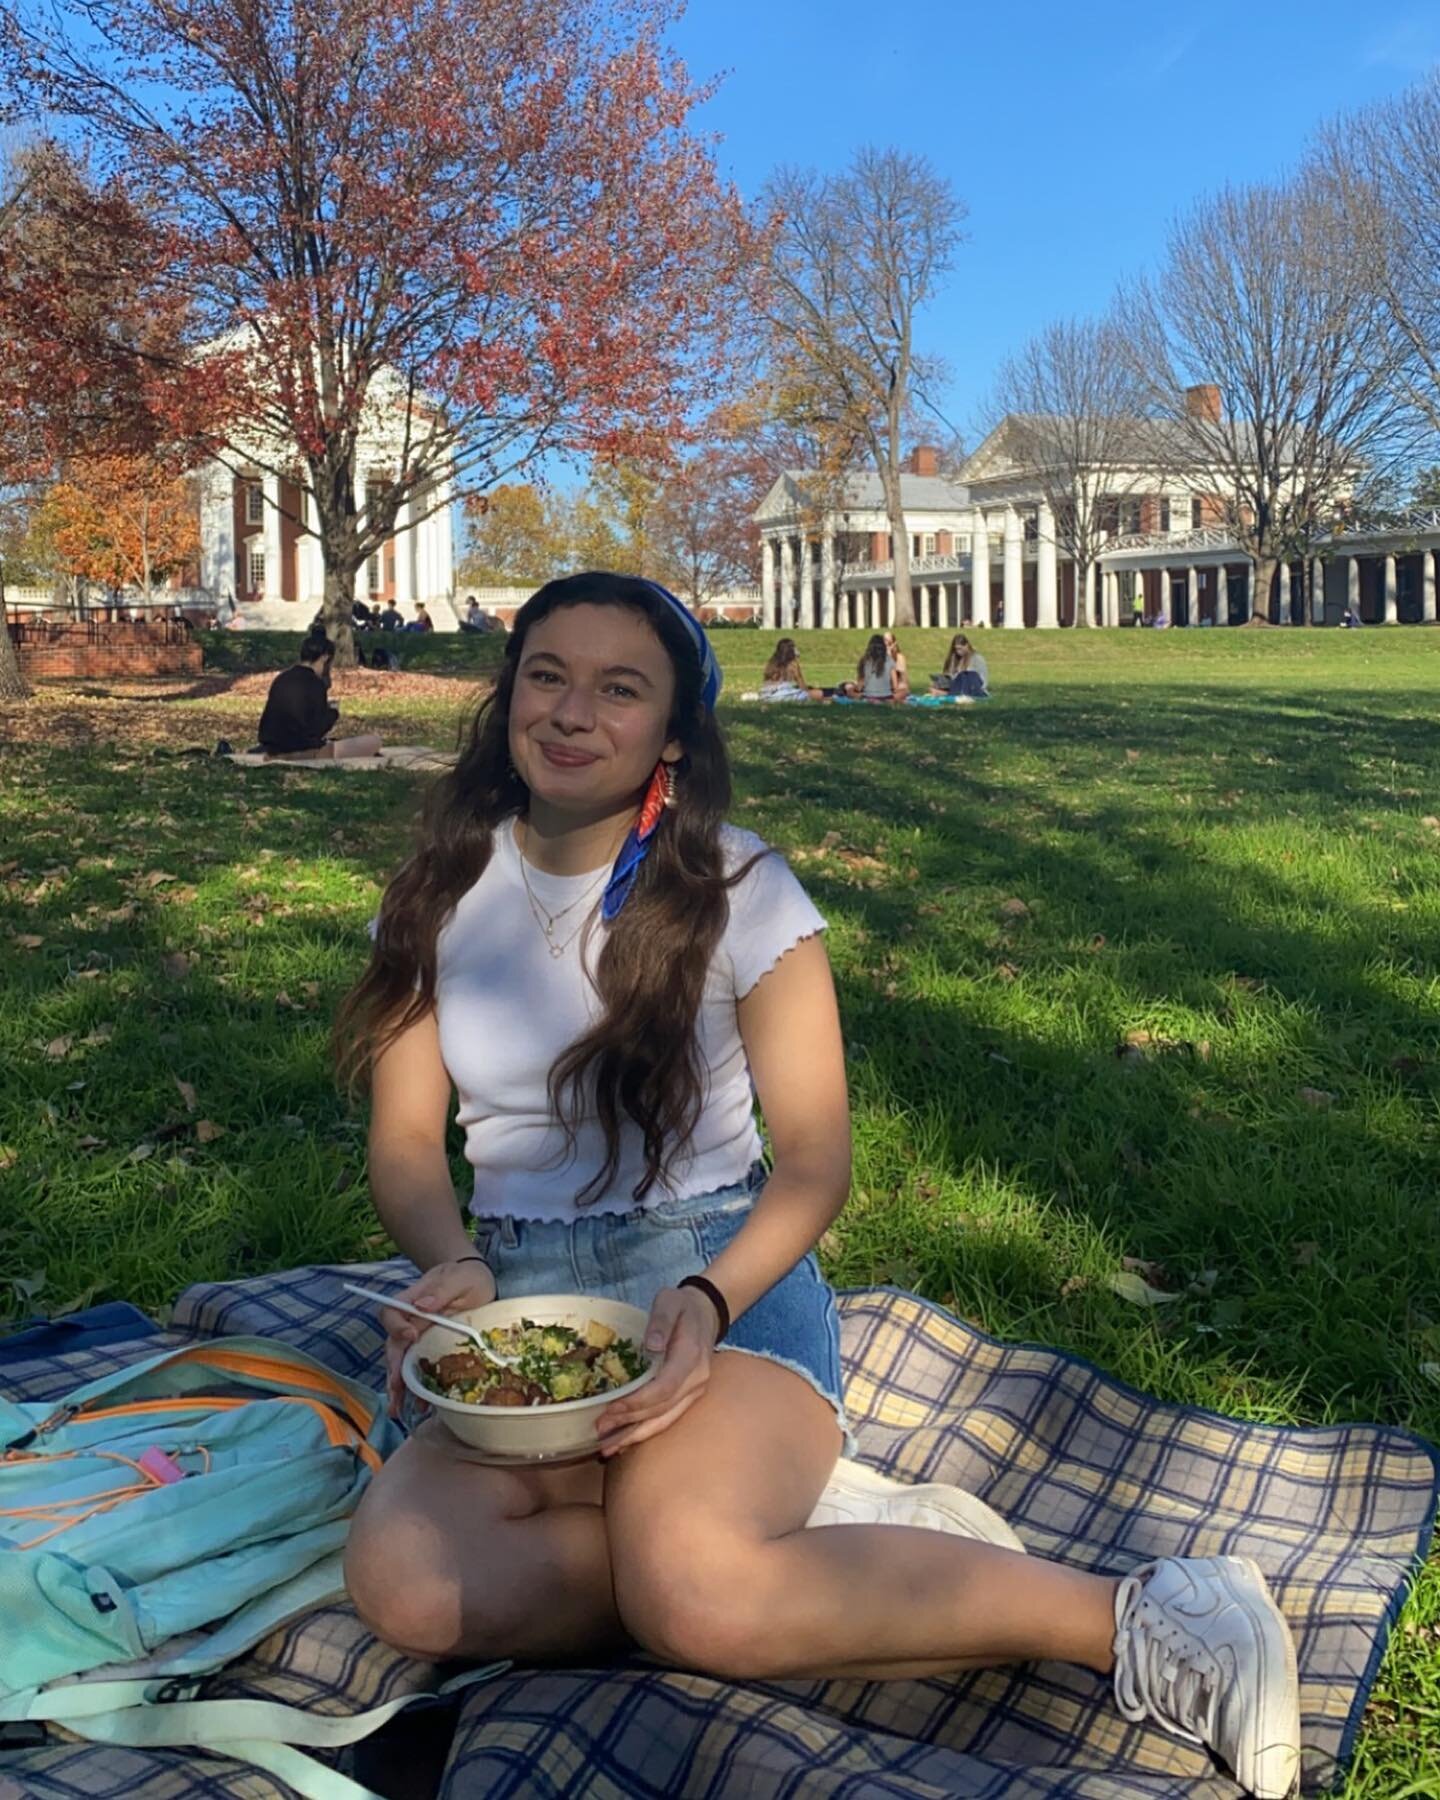 Hi everybody! I&rsquo;m so excited to take over the instagram today! My name is Giselle Pfaeffle, I use she/her pronouns, and I&rsquo;m a second year from Roanoke, Virginia studying Economics and Foreign Affairs with a minor in Portuguese. Please fee